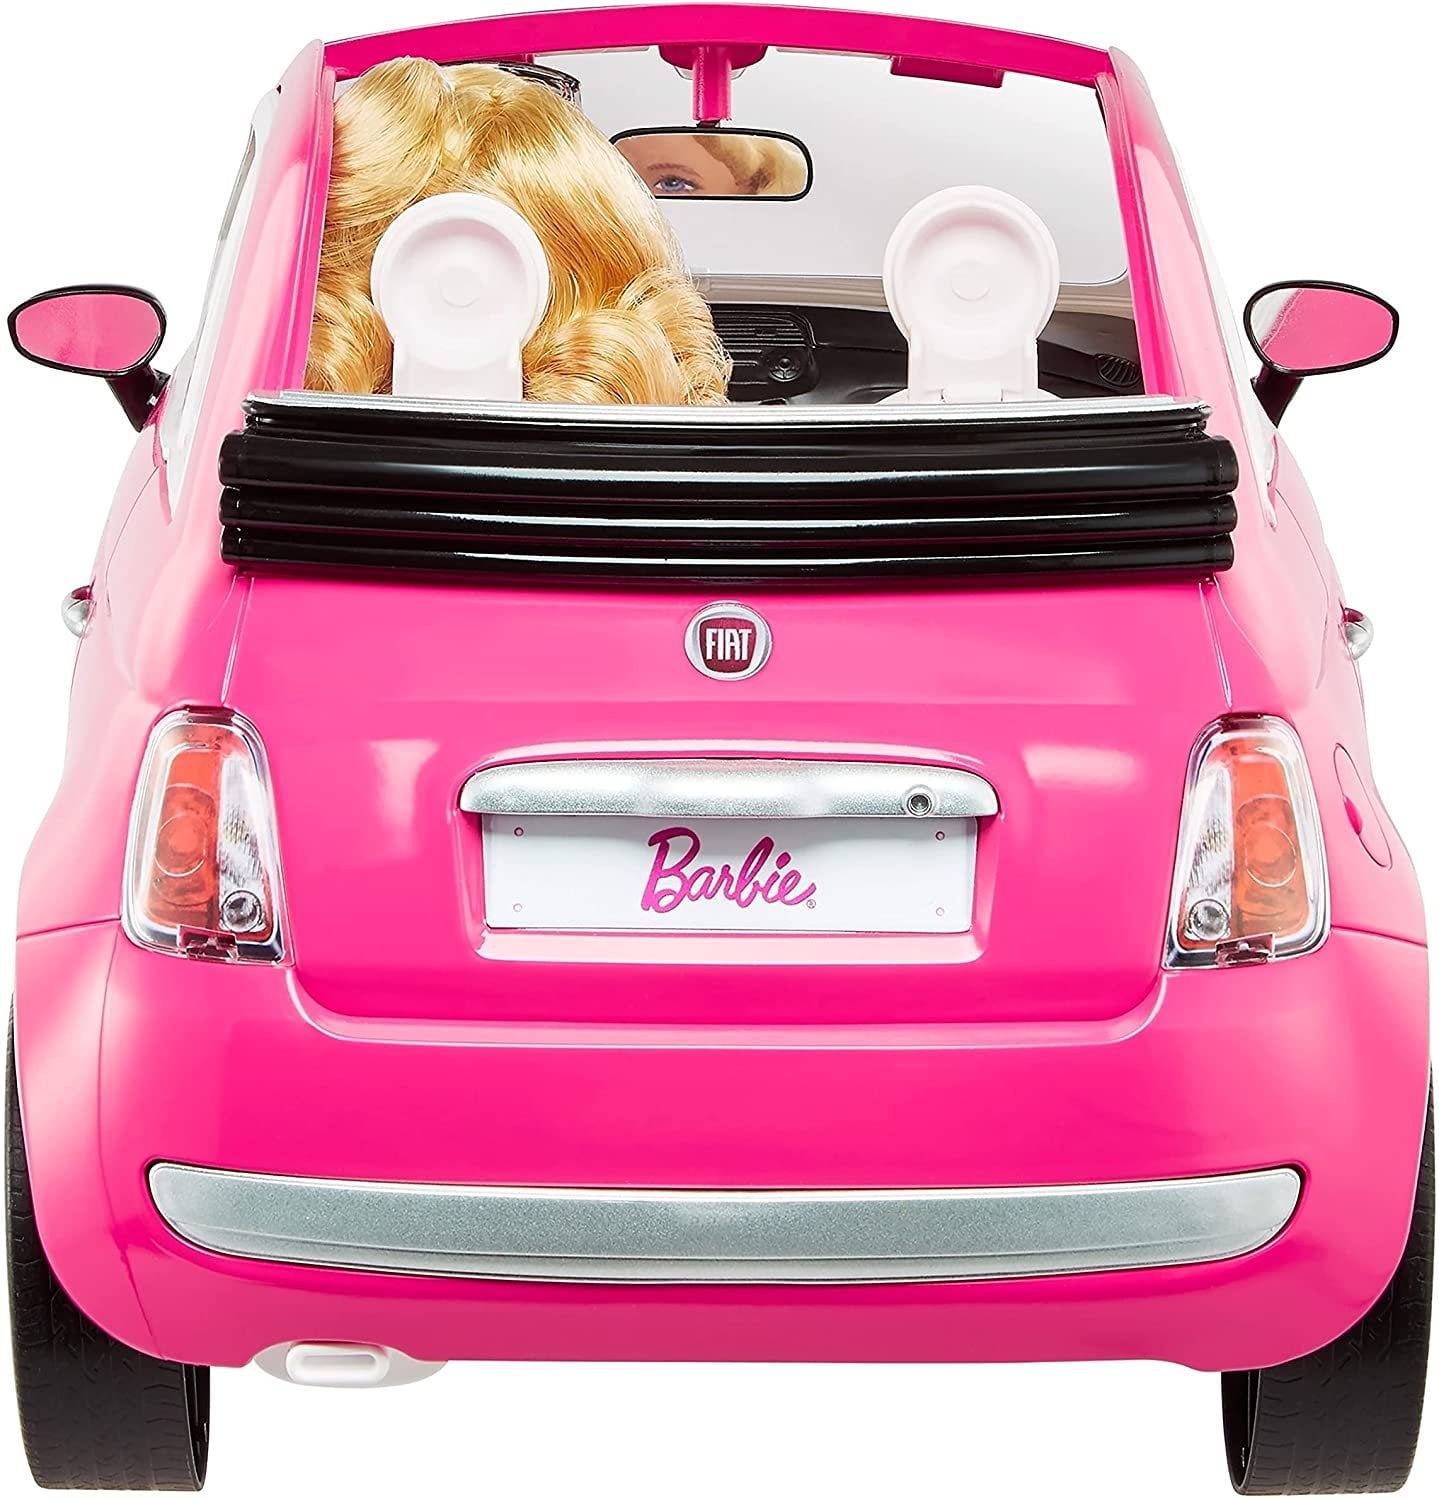 Barbie Fiat 500 Car and Doll Playset - Pink Convertible for Child's